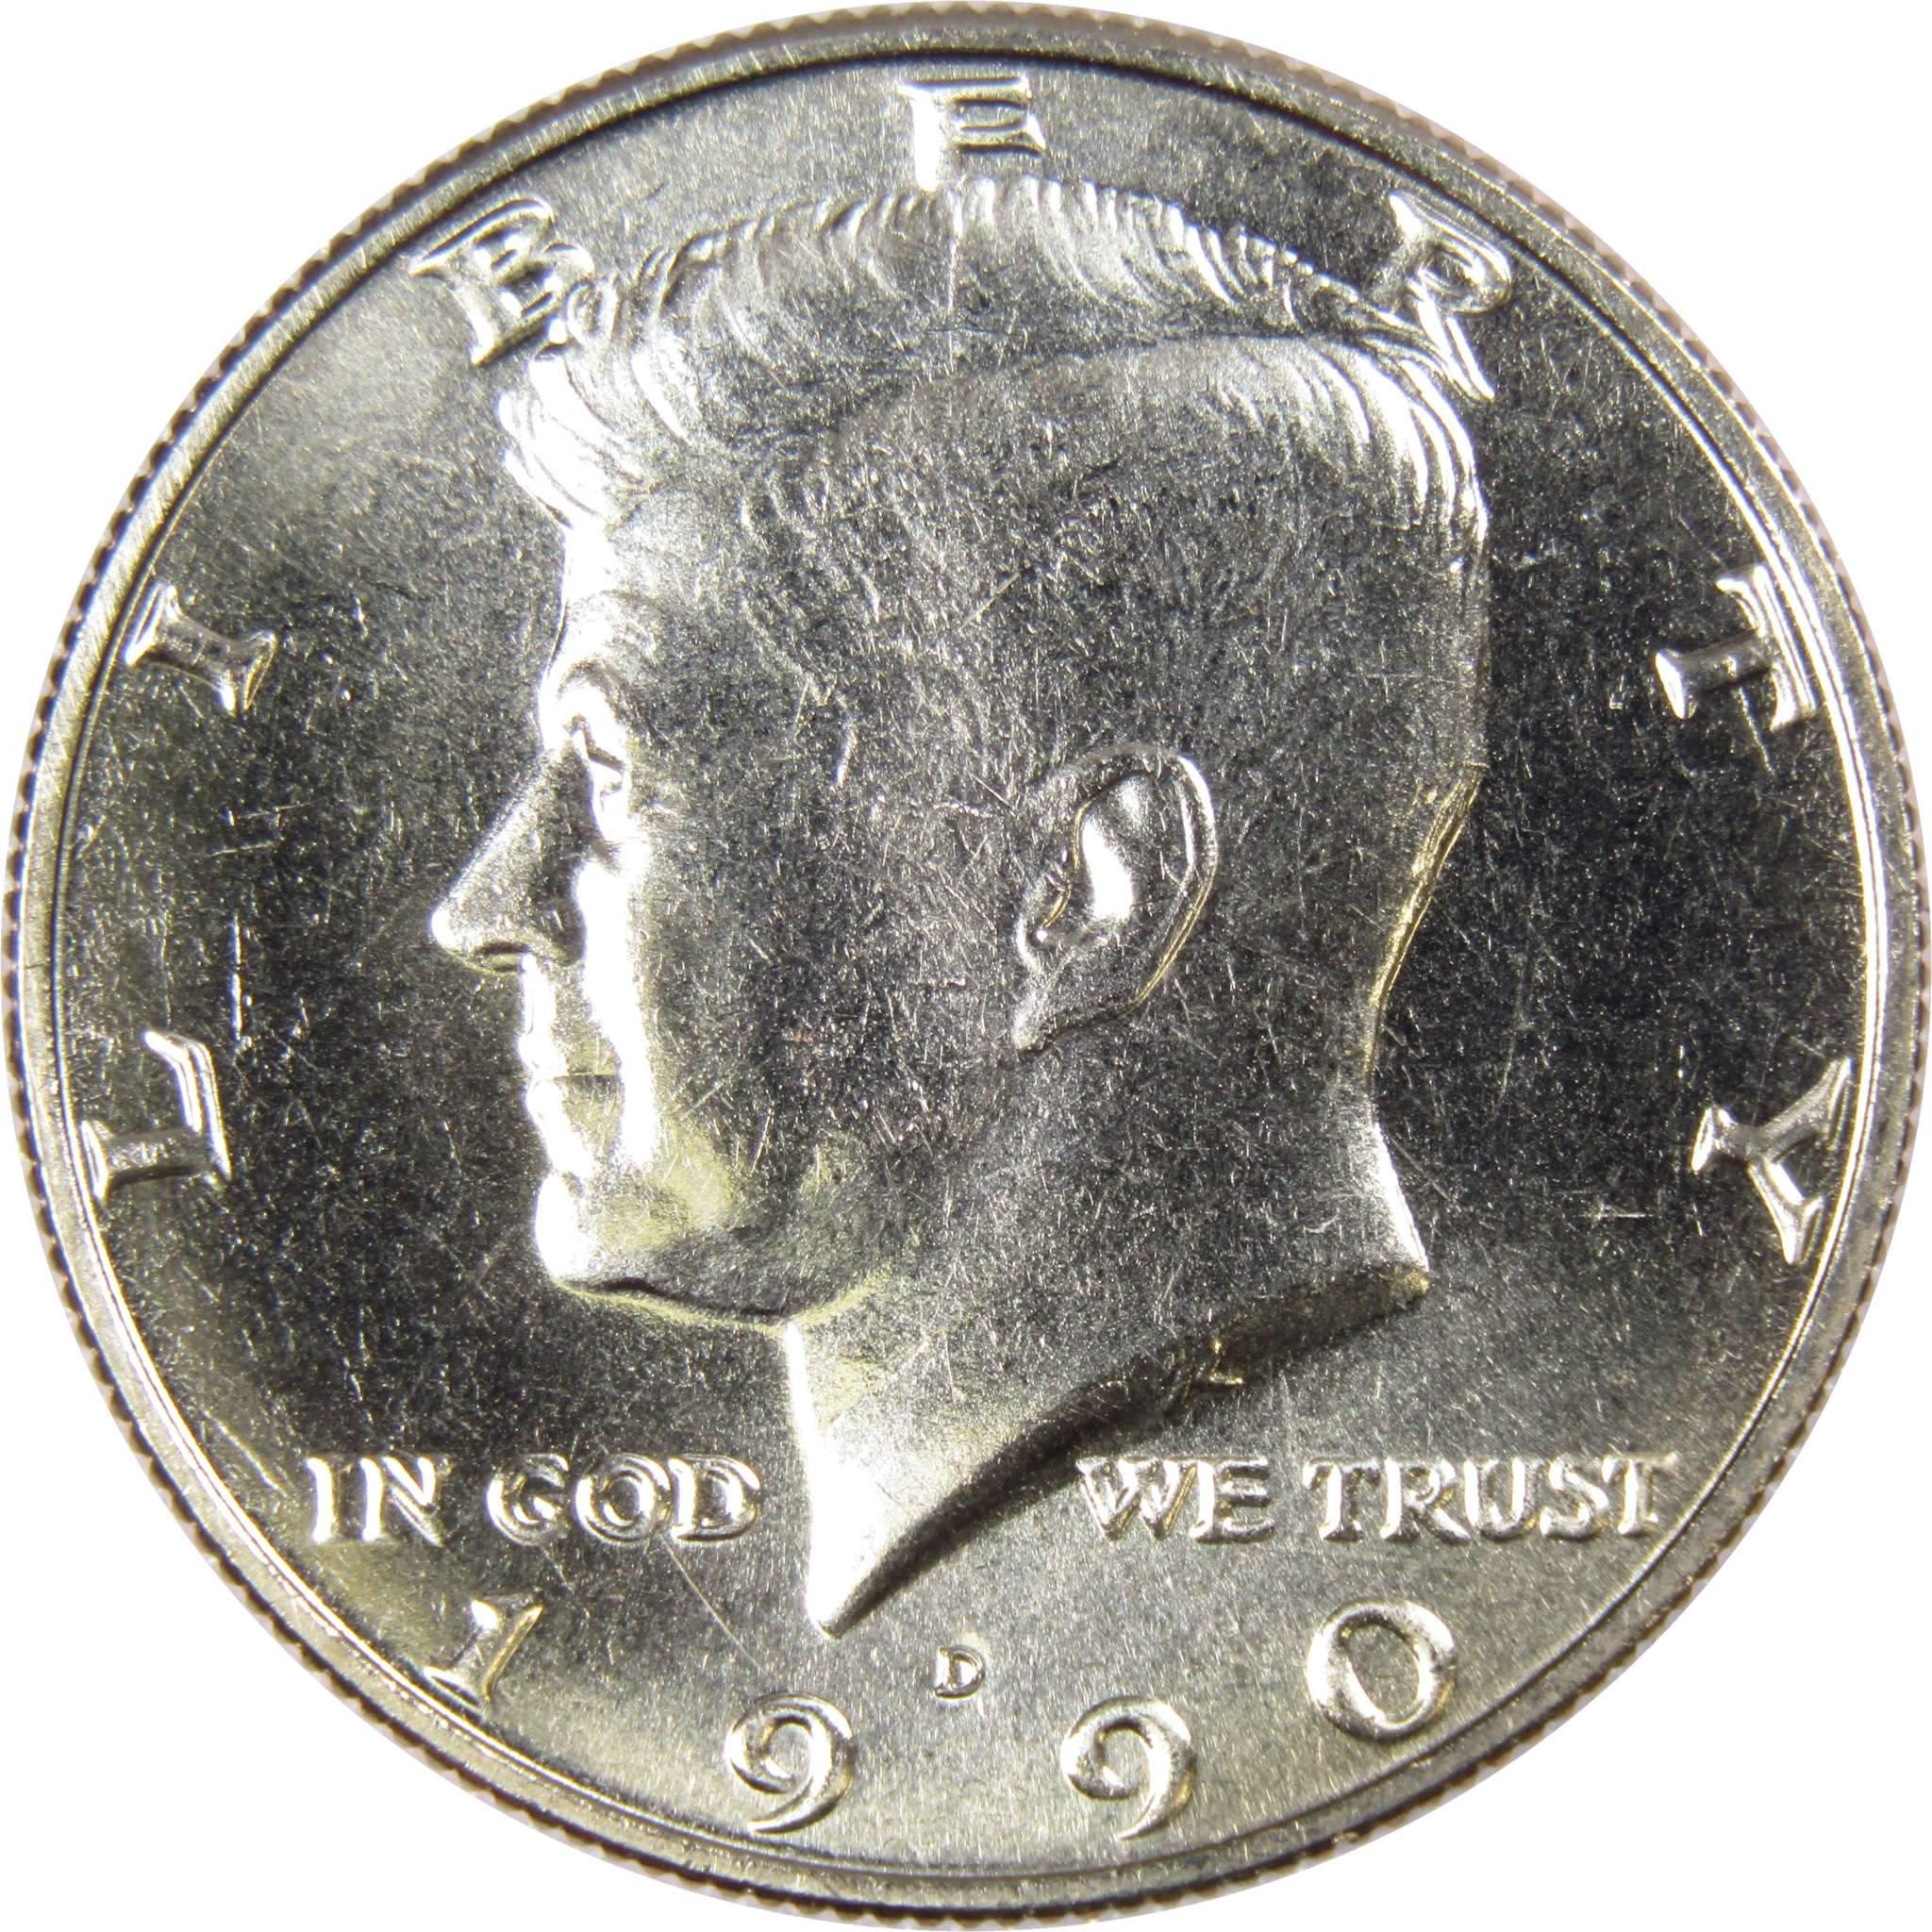 1990 D Kennedy Half Dollar BU Uncirculated Mint State 50c US Coin Collectible